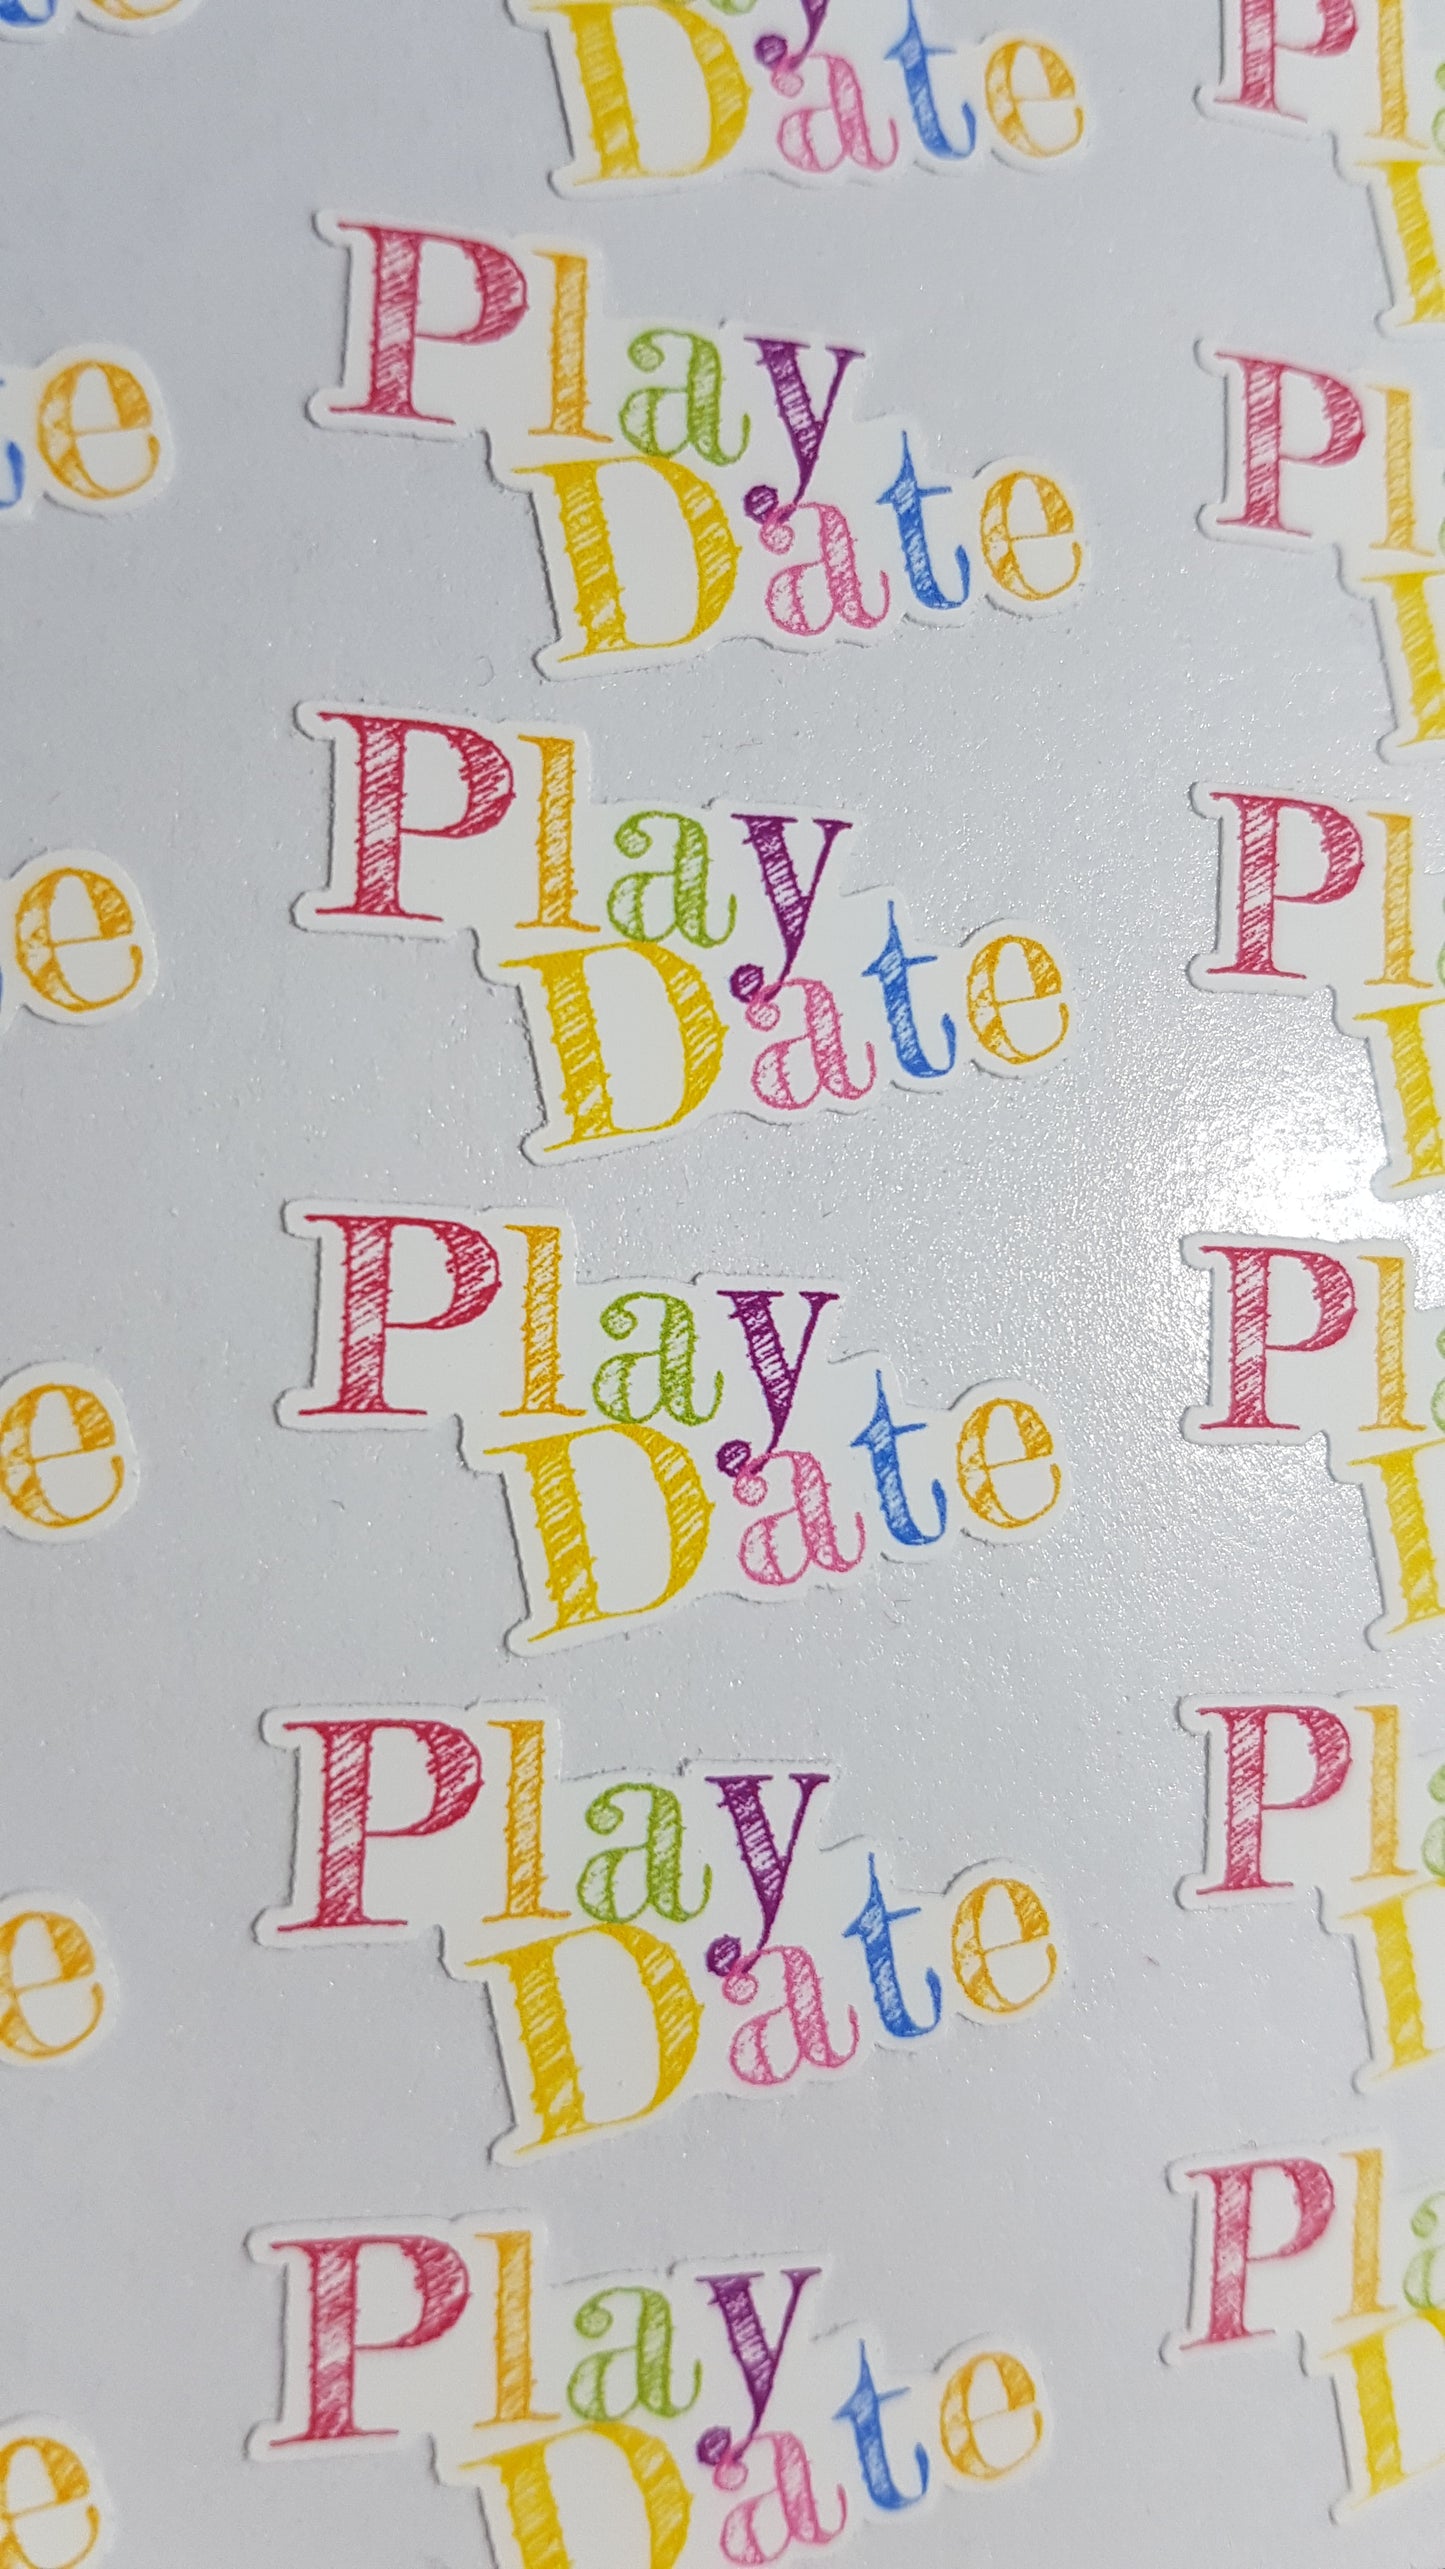 Play Date Stickers for Child or Adult Play Dates